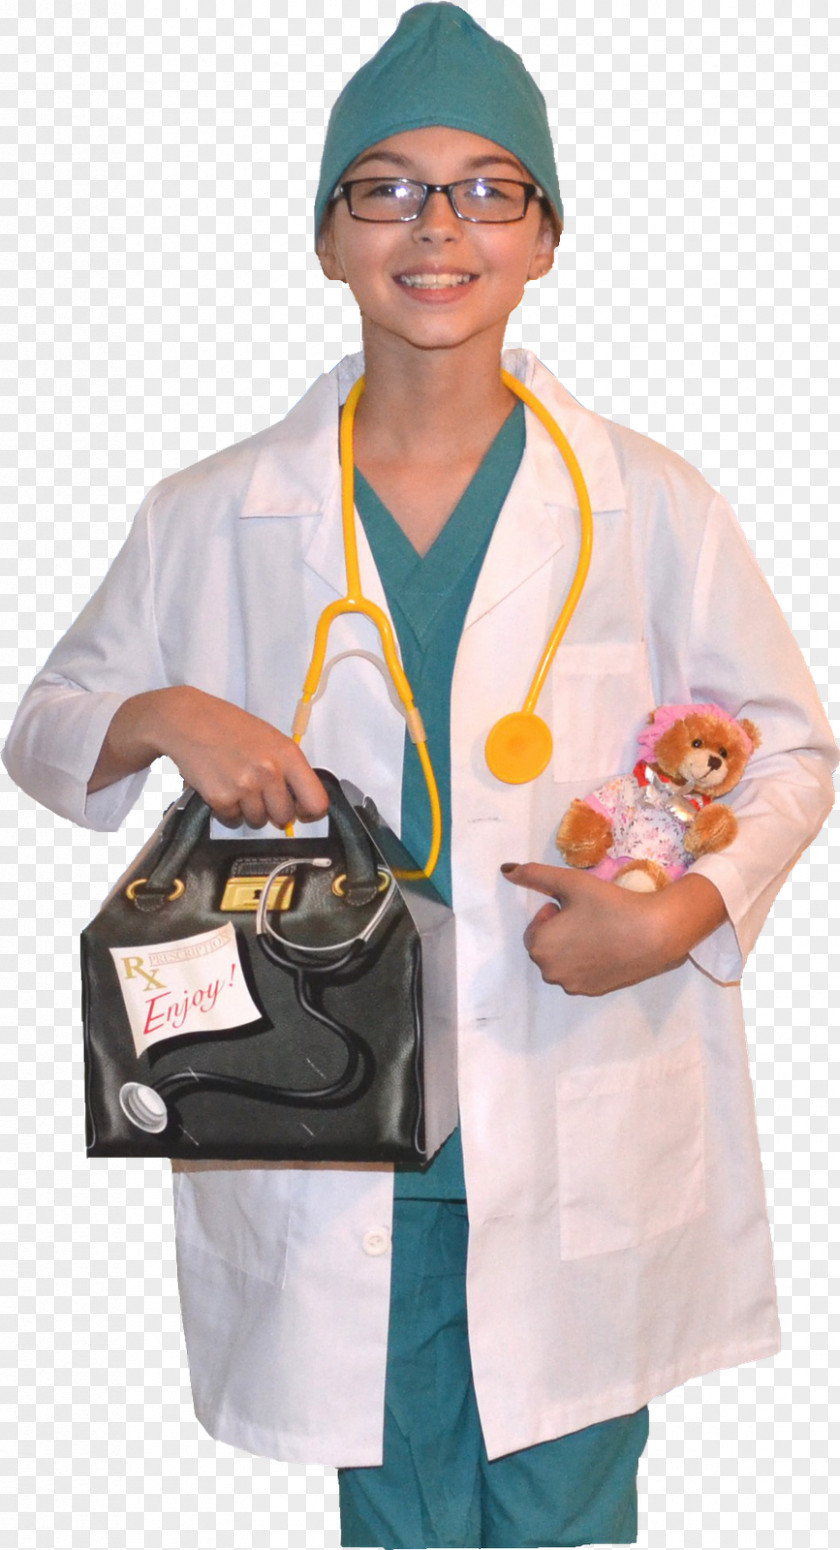 Child Physician Costume Scrubs Lab Coats PNG